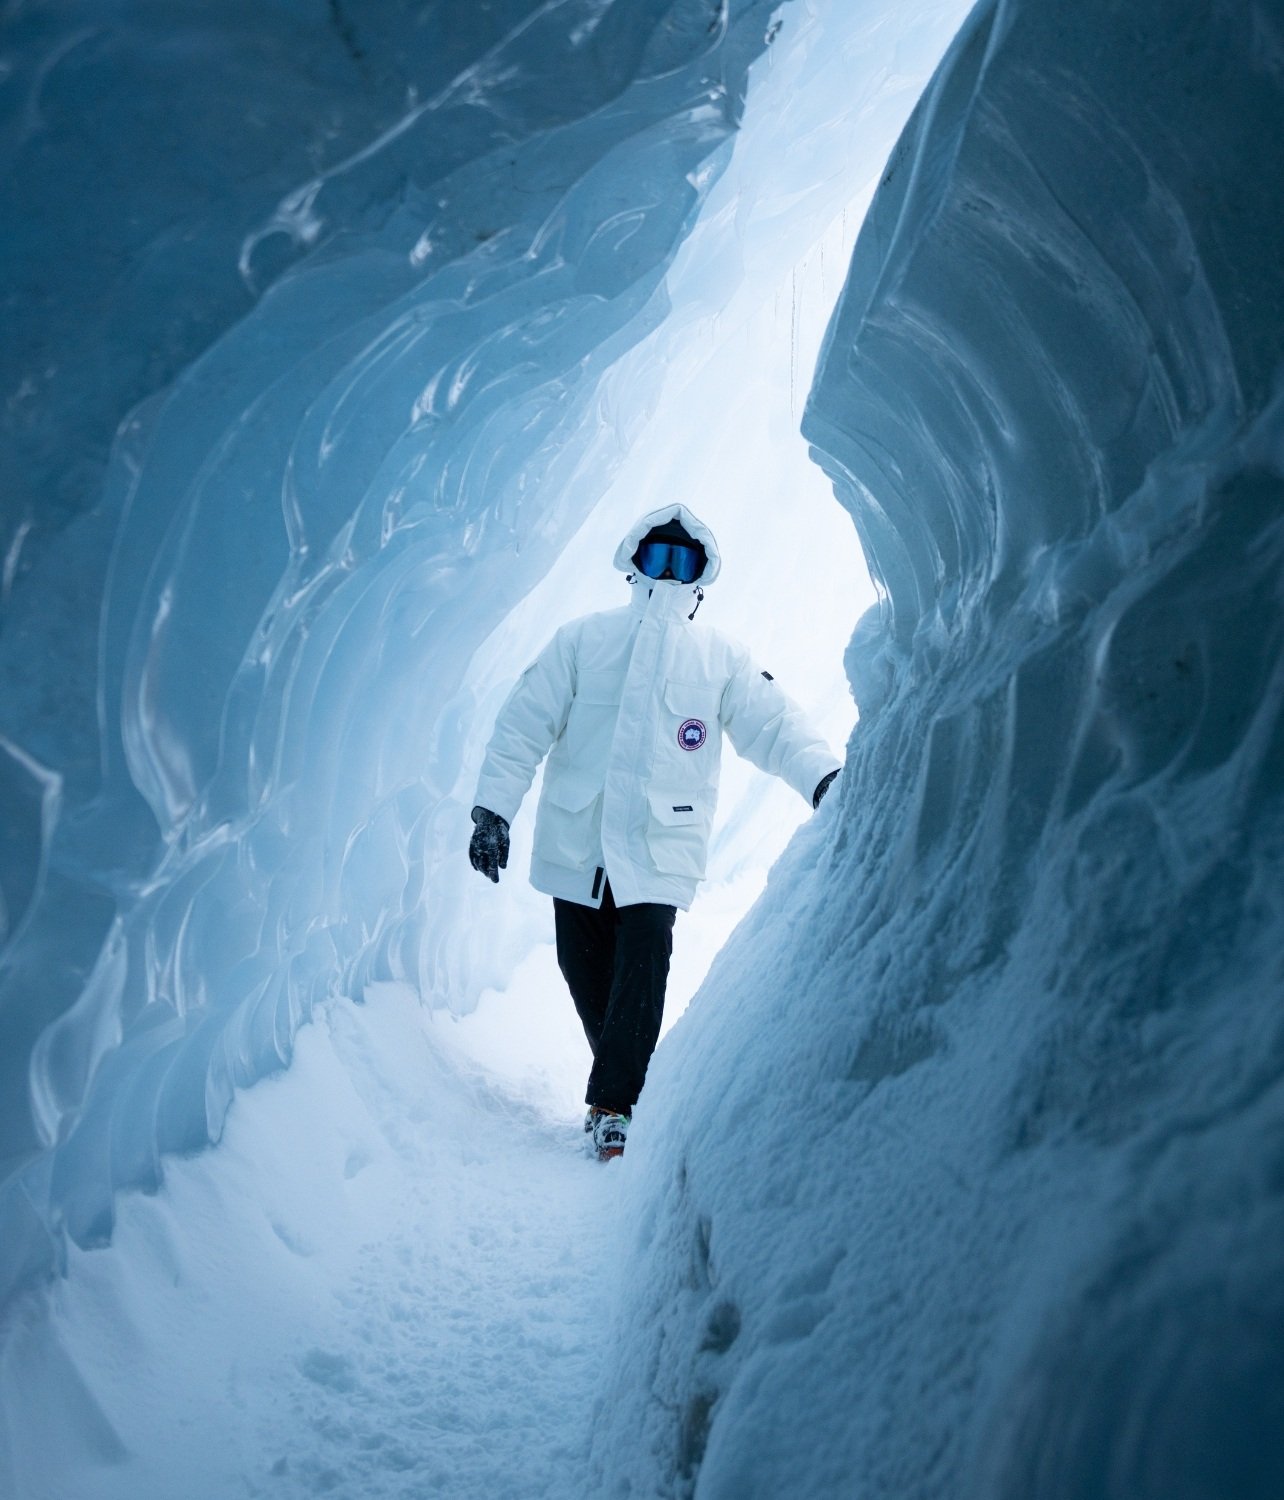 Guest visiting the inside of a naturally forming ice tunnel in Antarctica